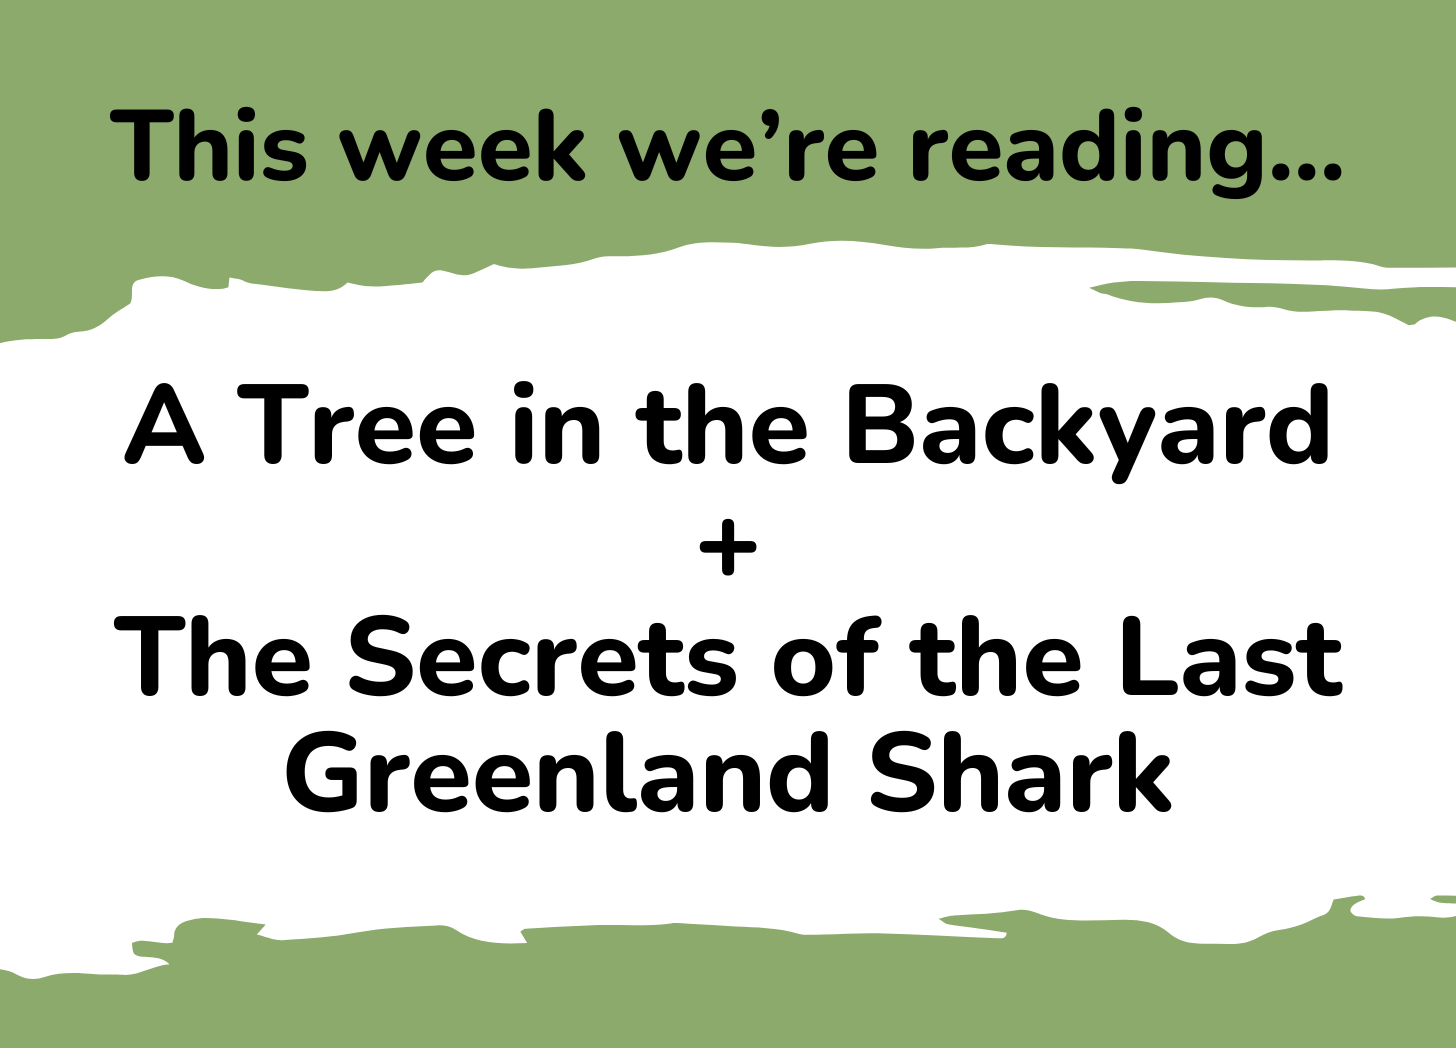 This week we're reading... A Tree in the Backyard + The Secrets of the Last Greenland Shark